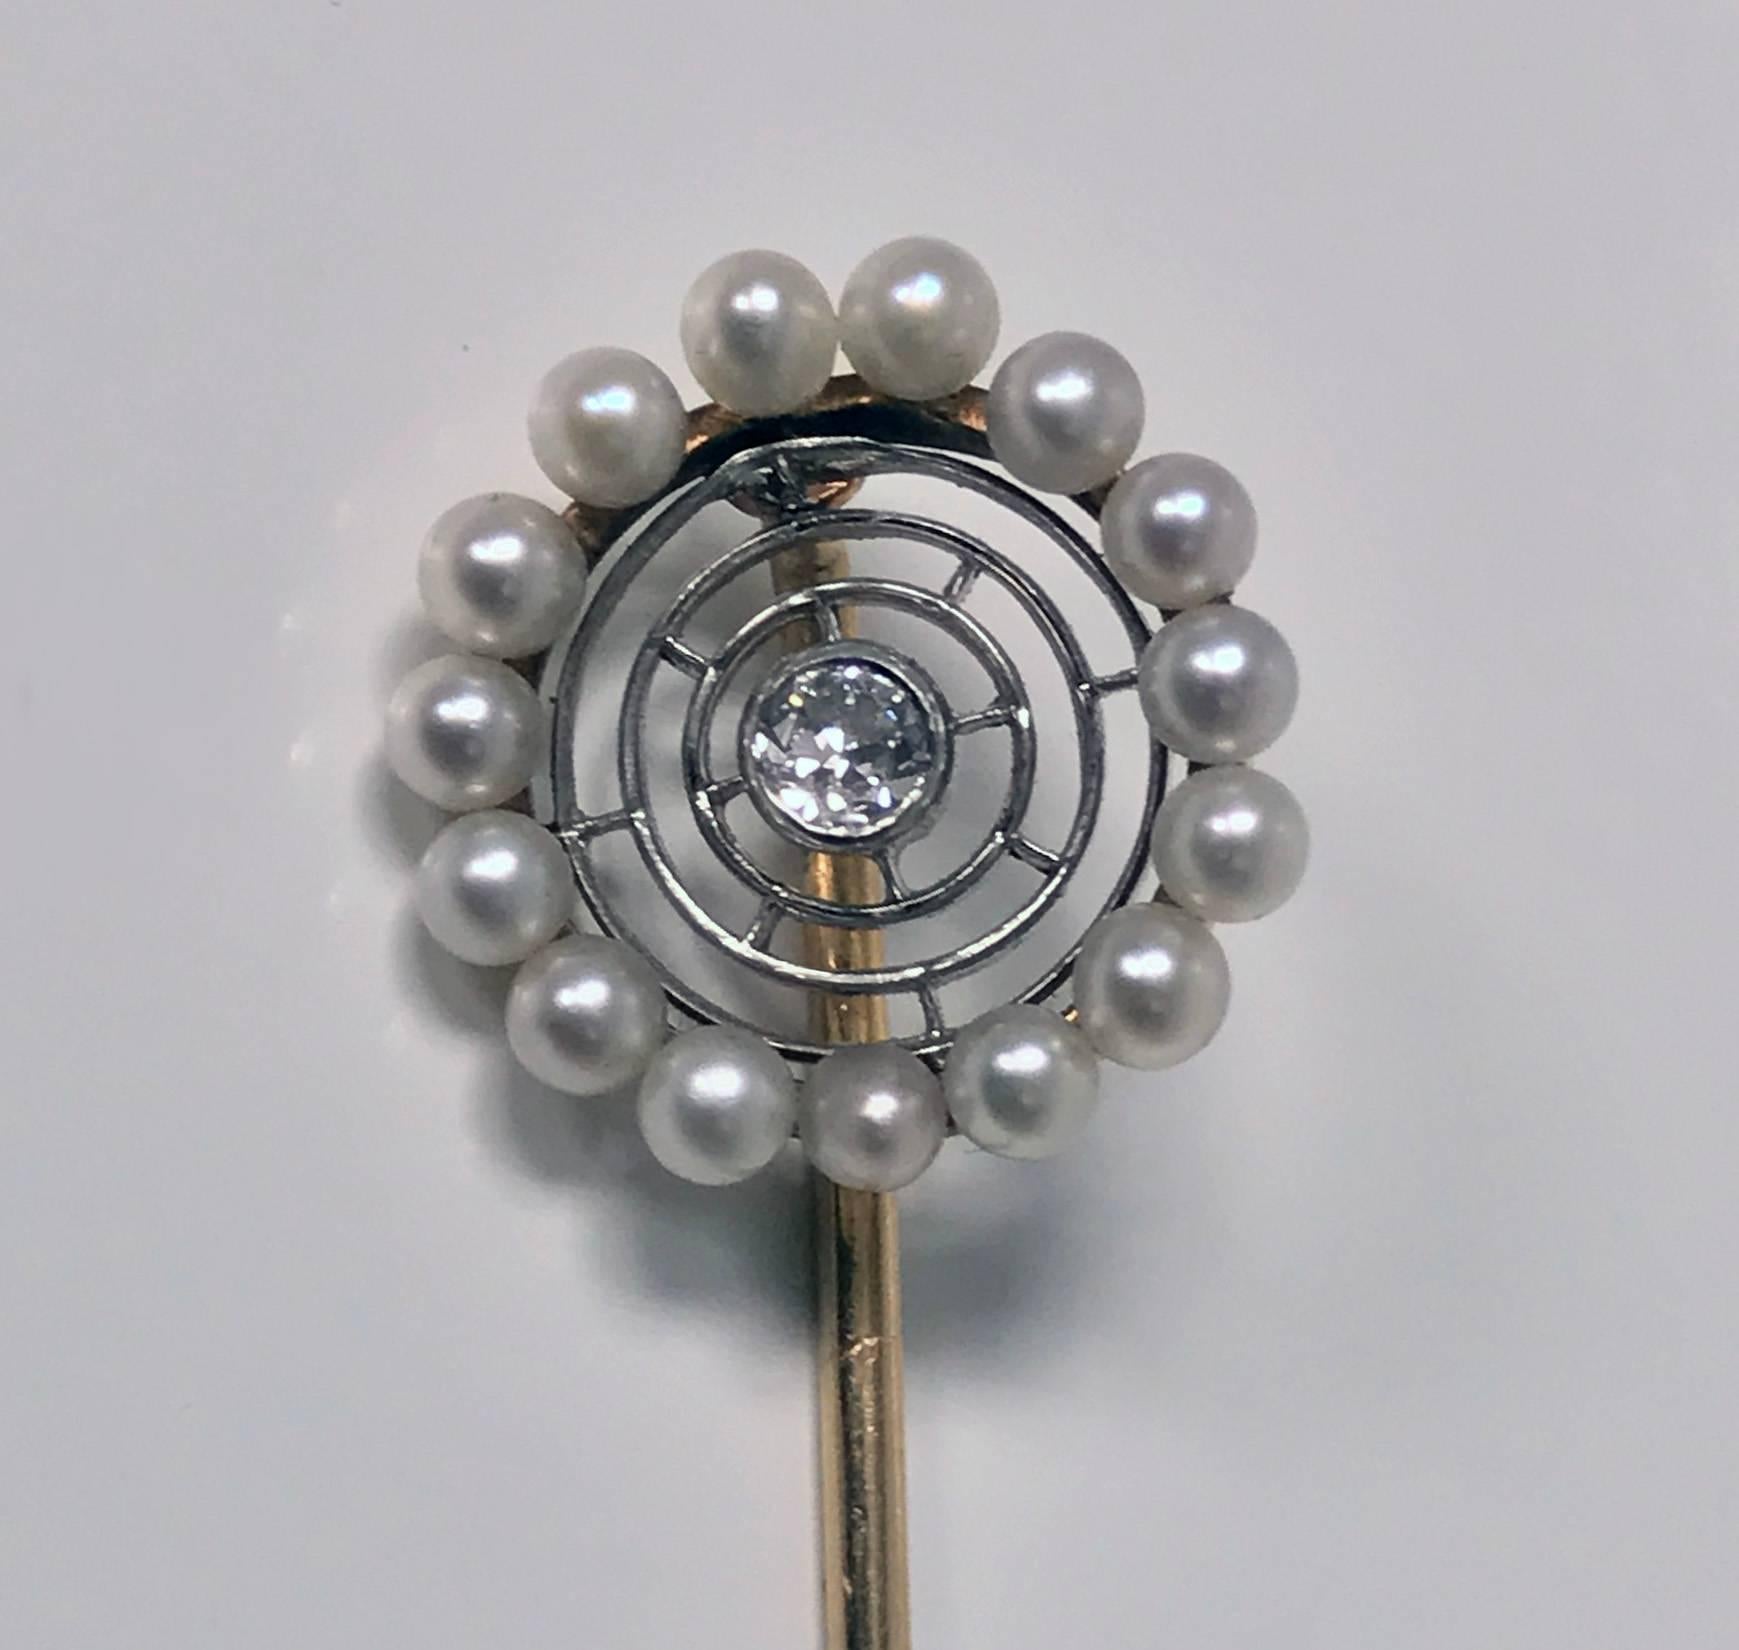 Antique Hans Brassler Diamond, Pearl, Gold and Platinum Stickpin, American, C.1900. The Stickpin of a spider web design, set in the centre with an old cut diamond, approximately 0.07 ct and a surround of 15 round pearls (untested for natural),